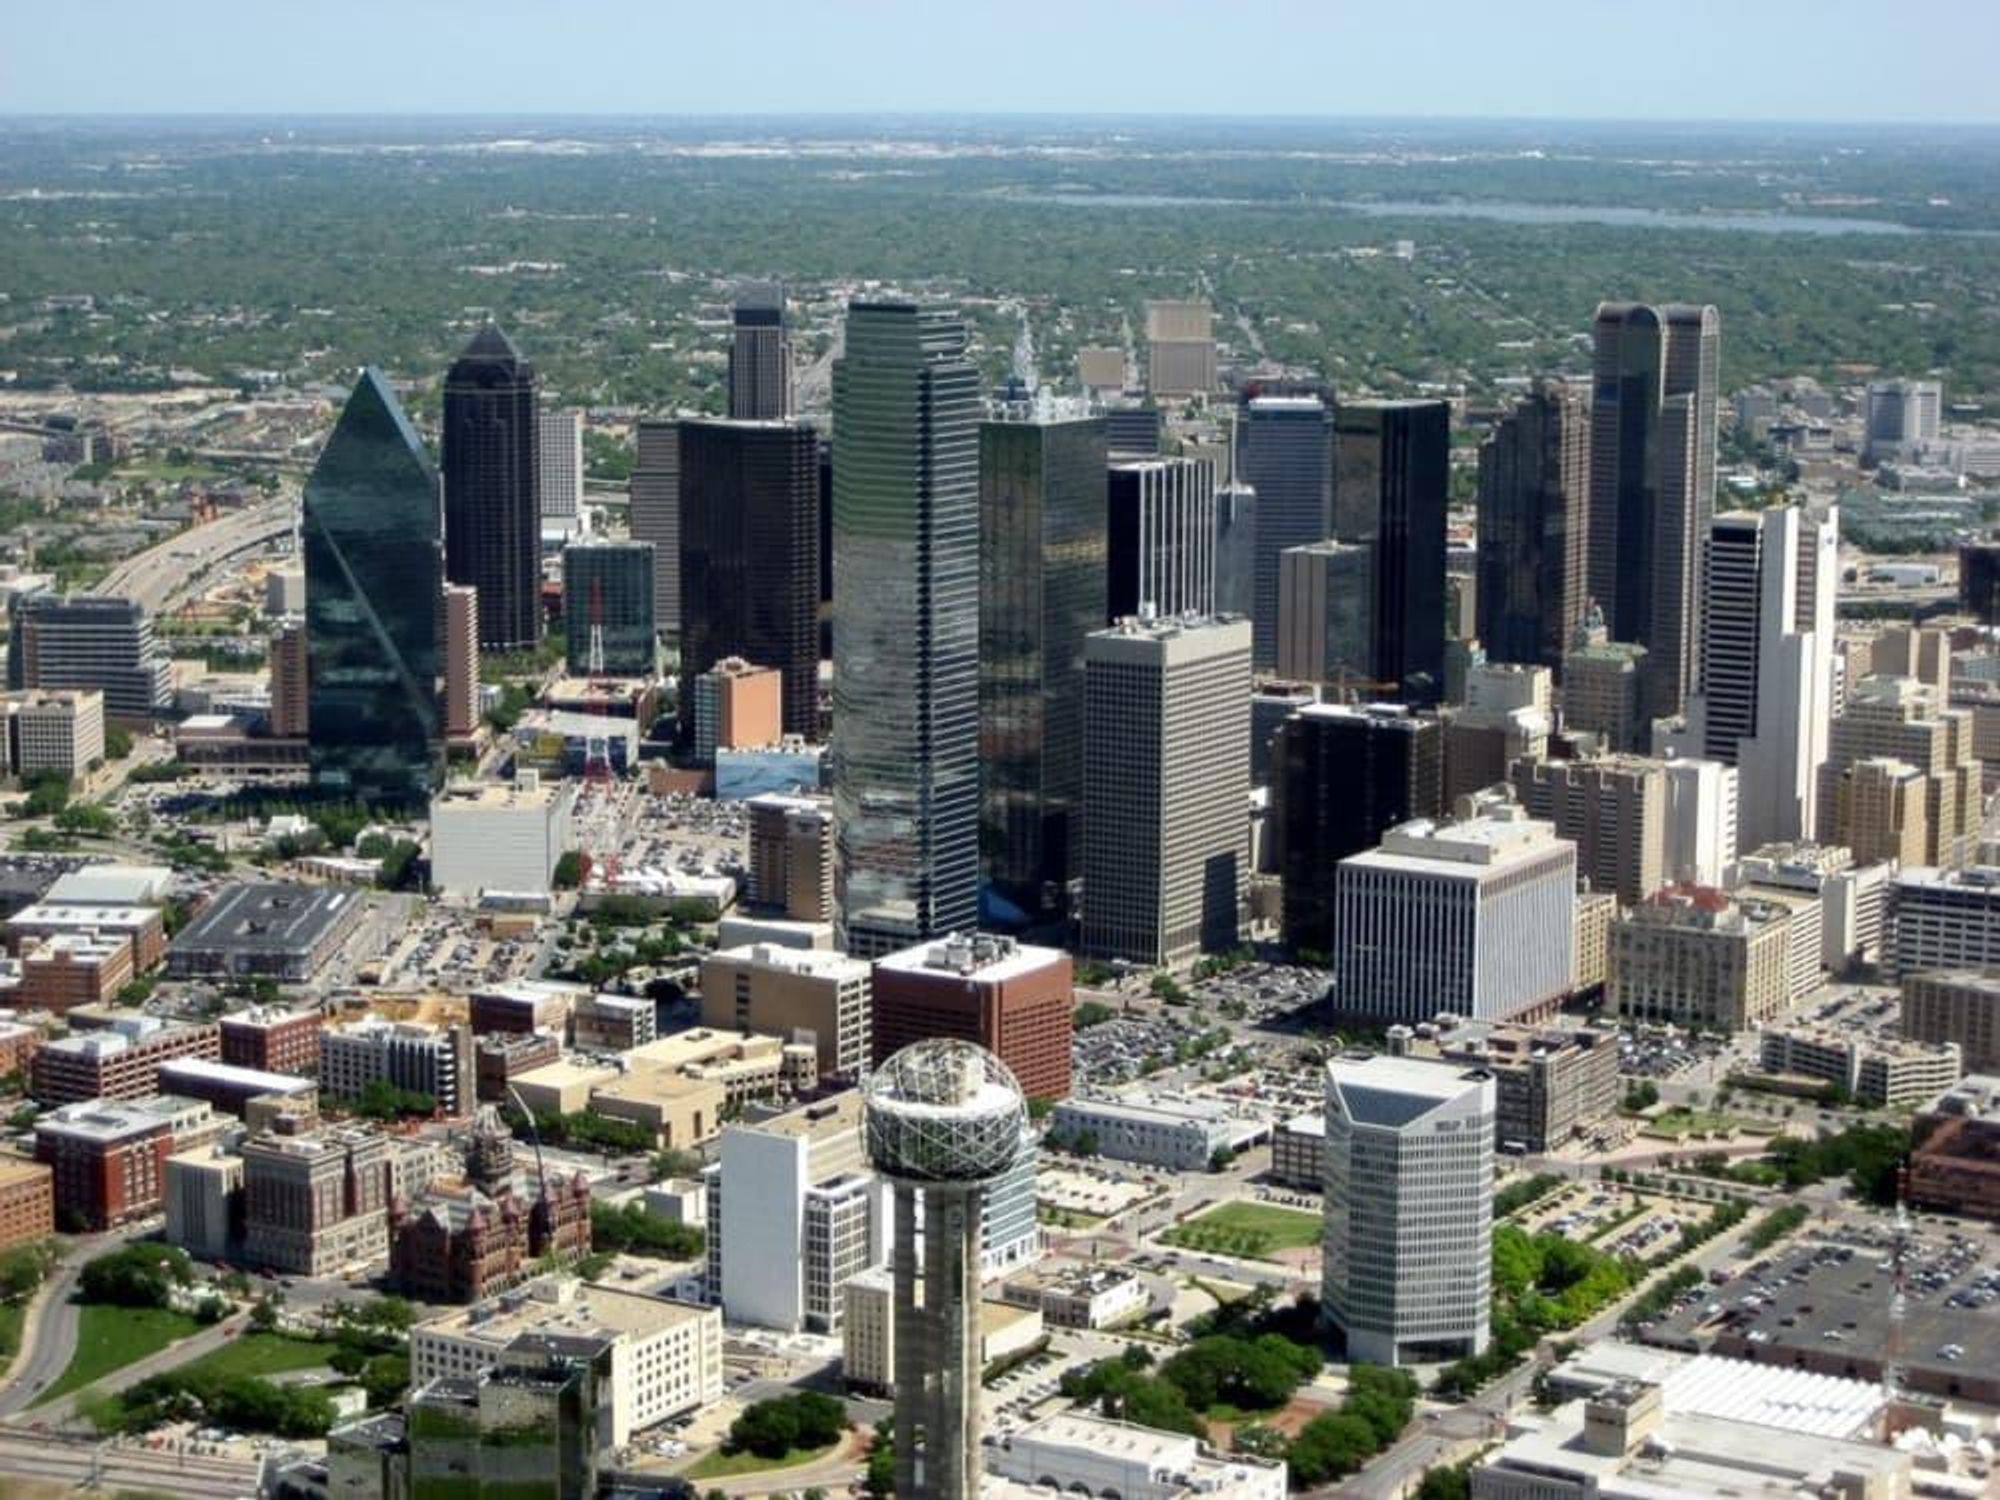 Dallas skyline downtown during day